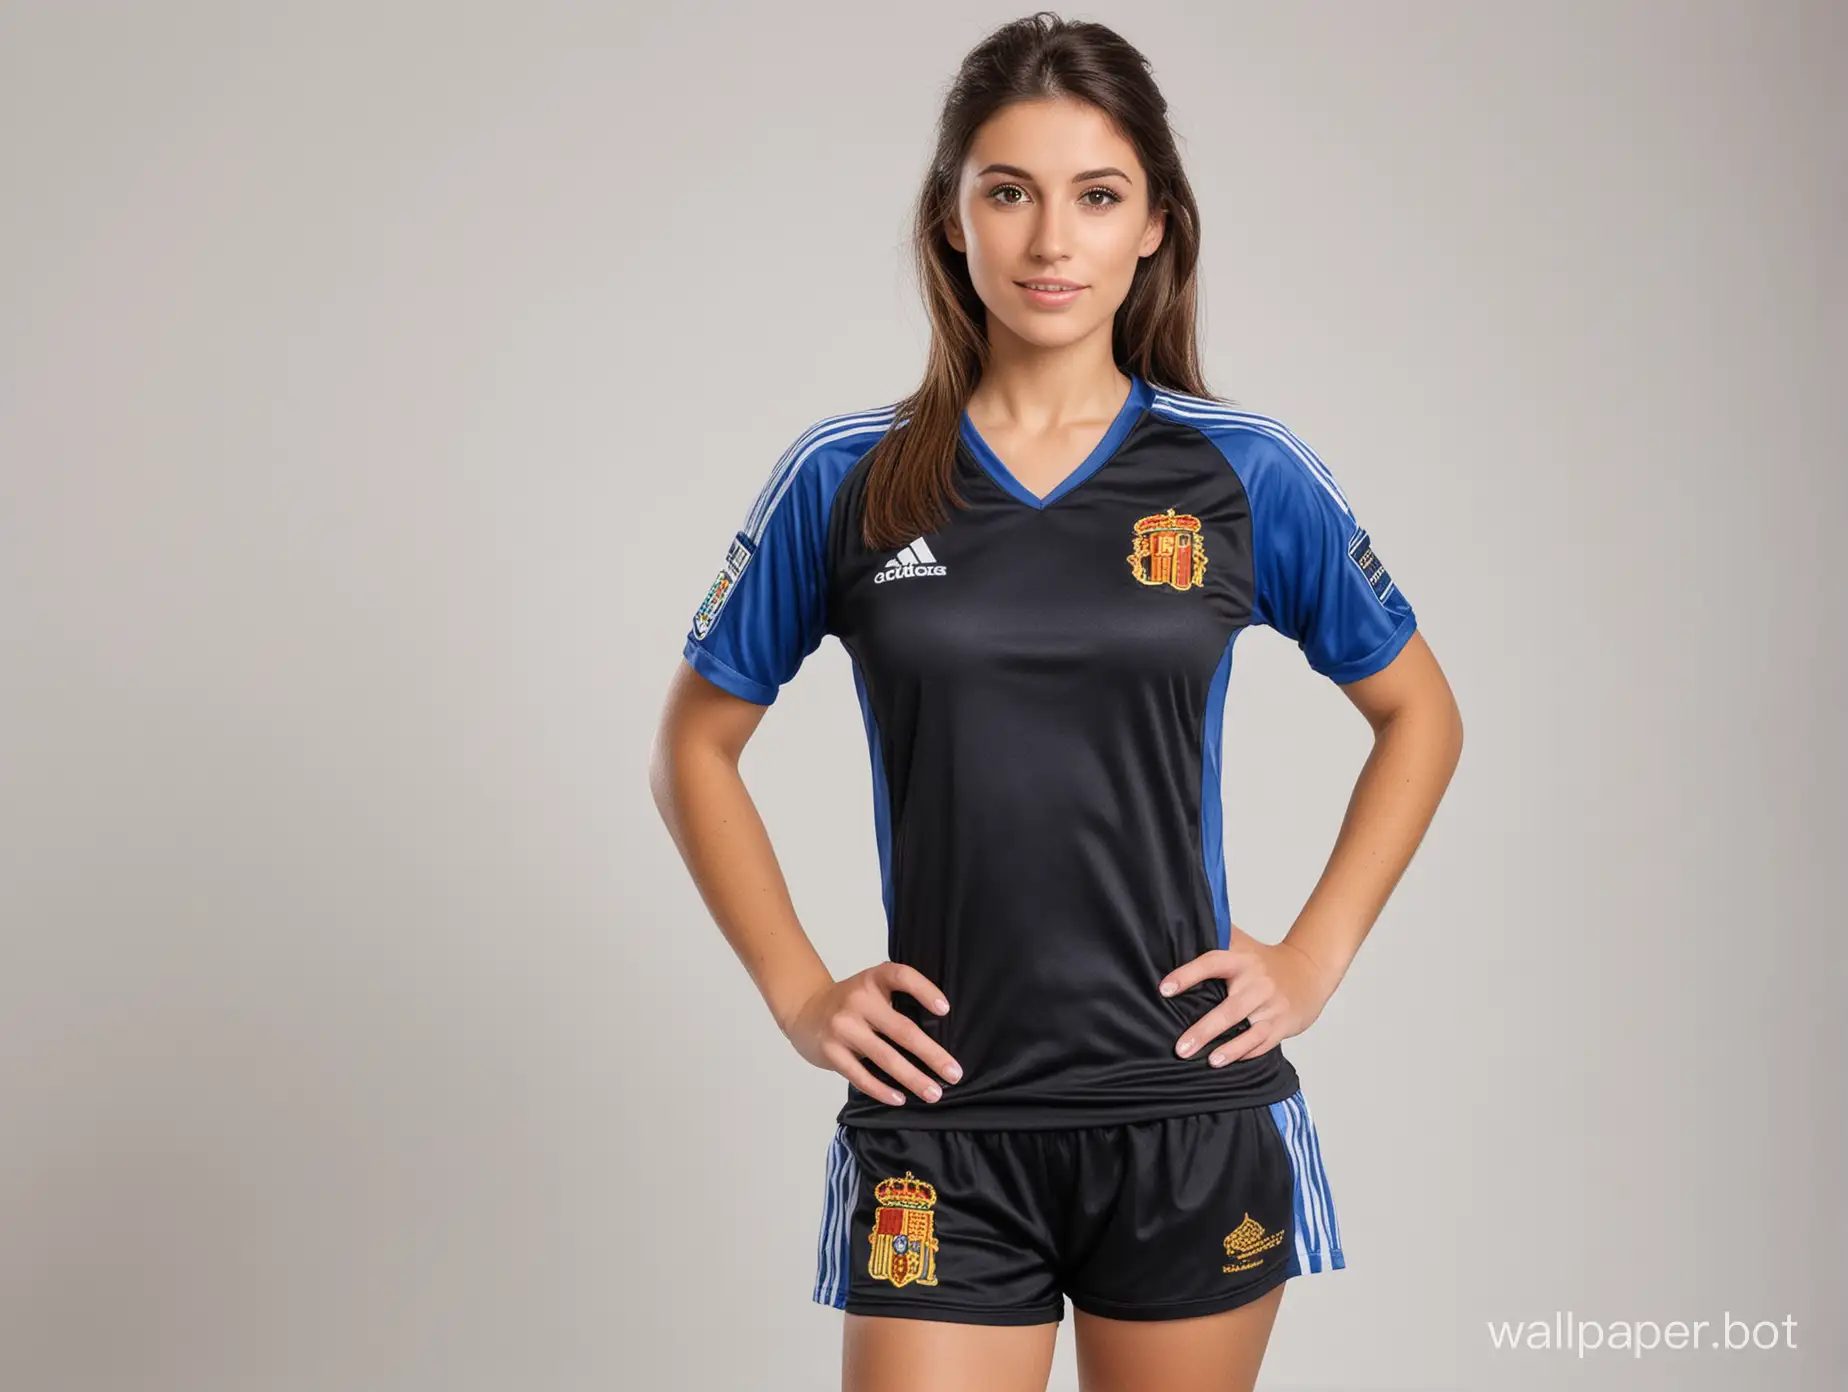 Stunning-Portrait-of-a-25YearOld-Spanish-Soccer-Player-in-Black-and-Blue-Uniform